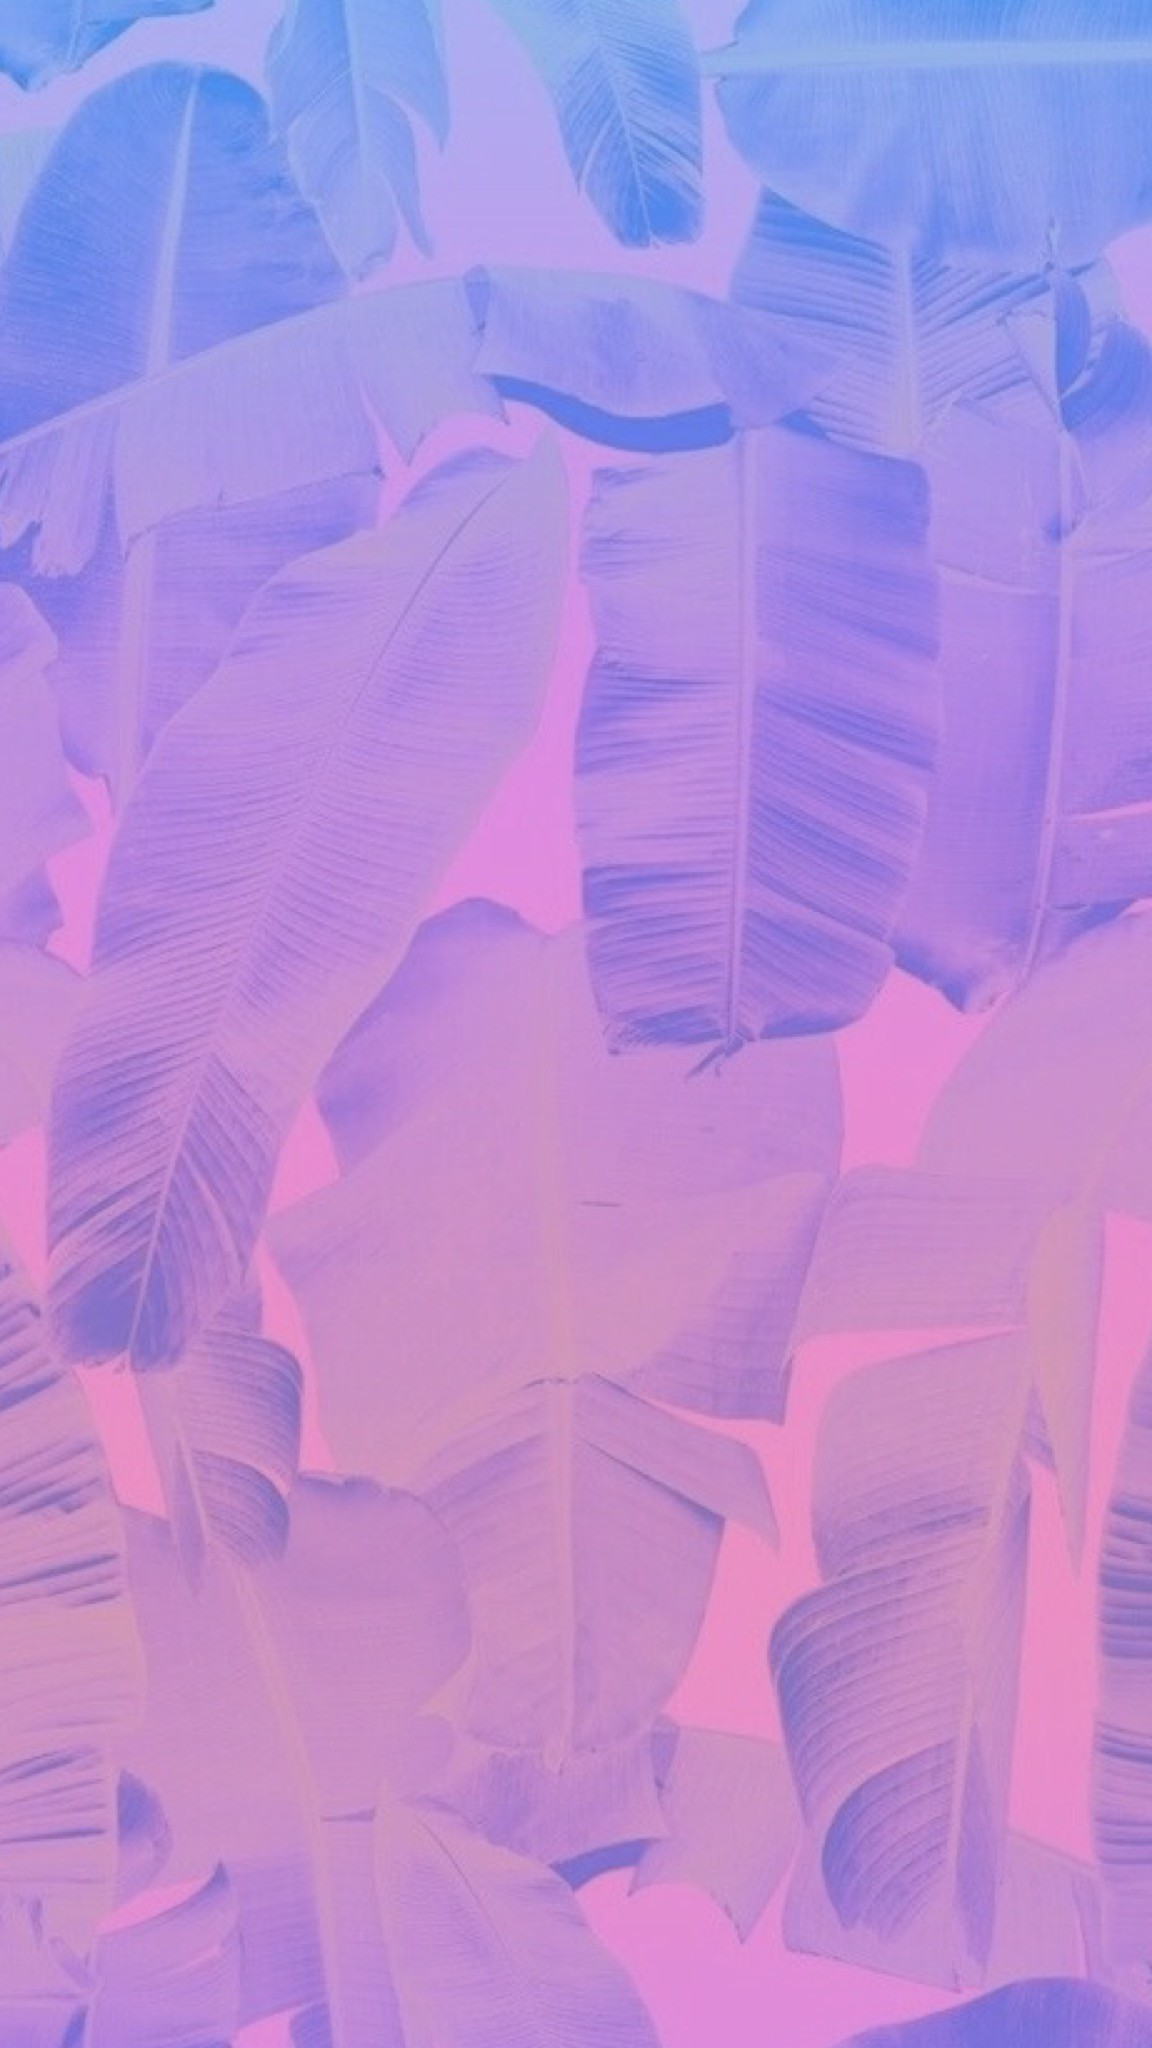 Original image not by me I just made the ombr / gradient. Leaves,. Pink Wallpaper IphonePurple WallpaperPhone BackgroundsWallpaper